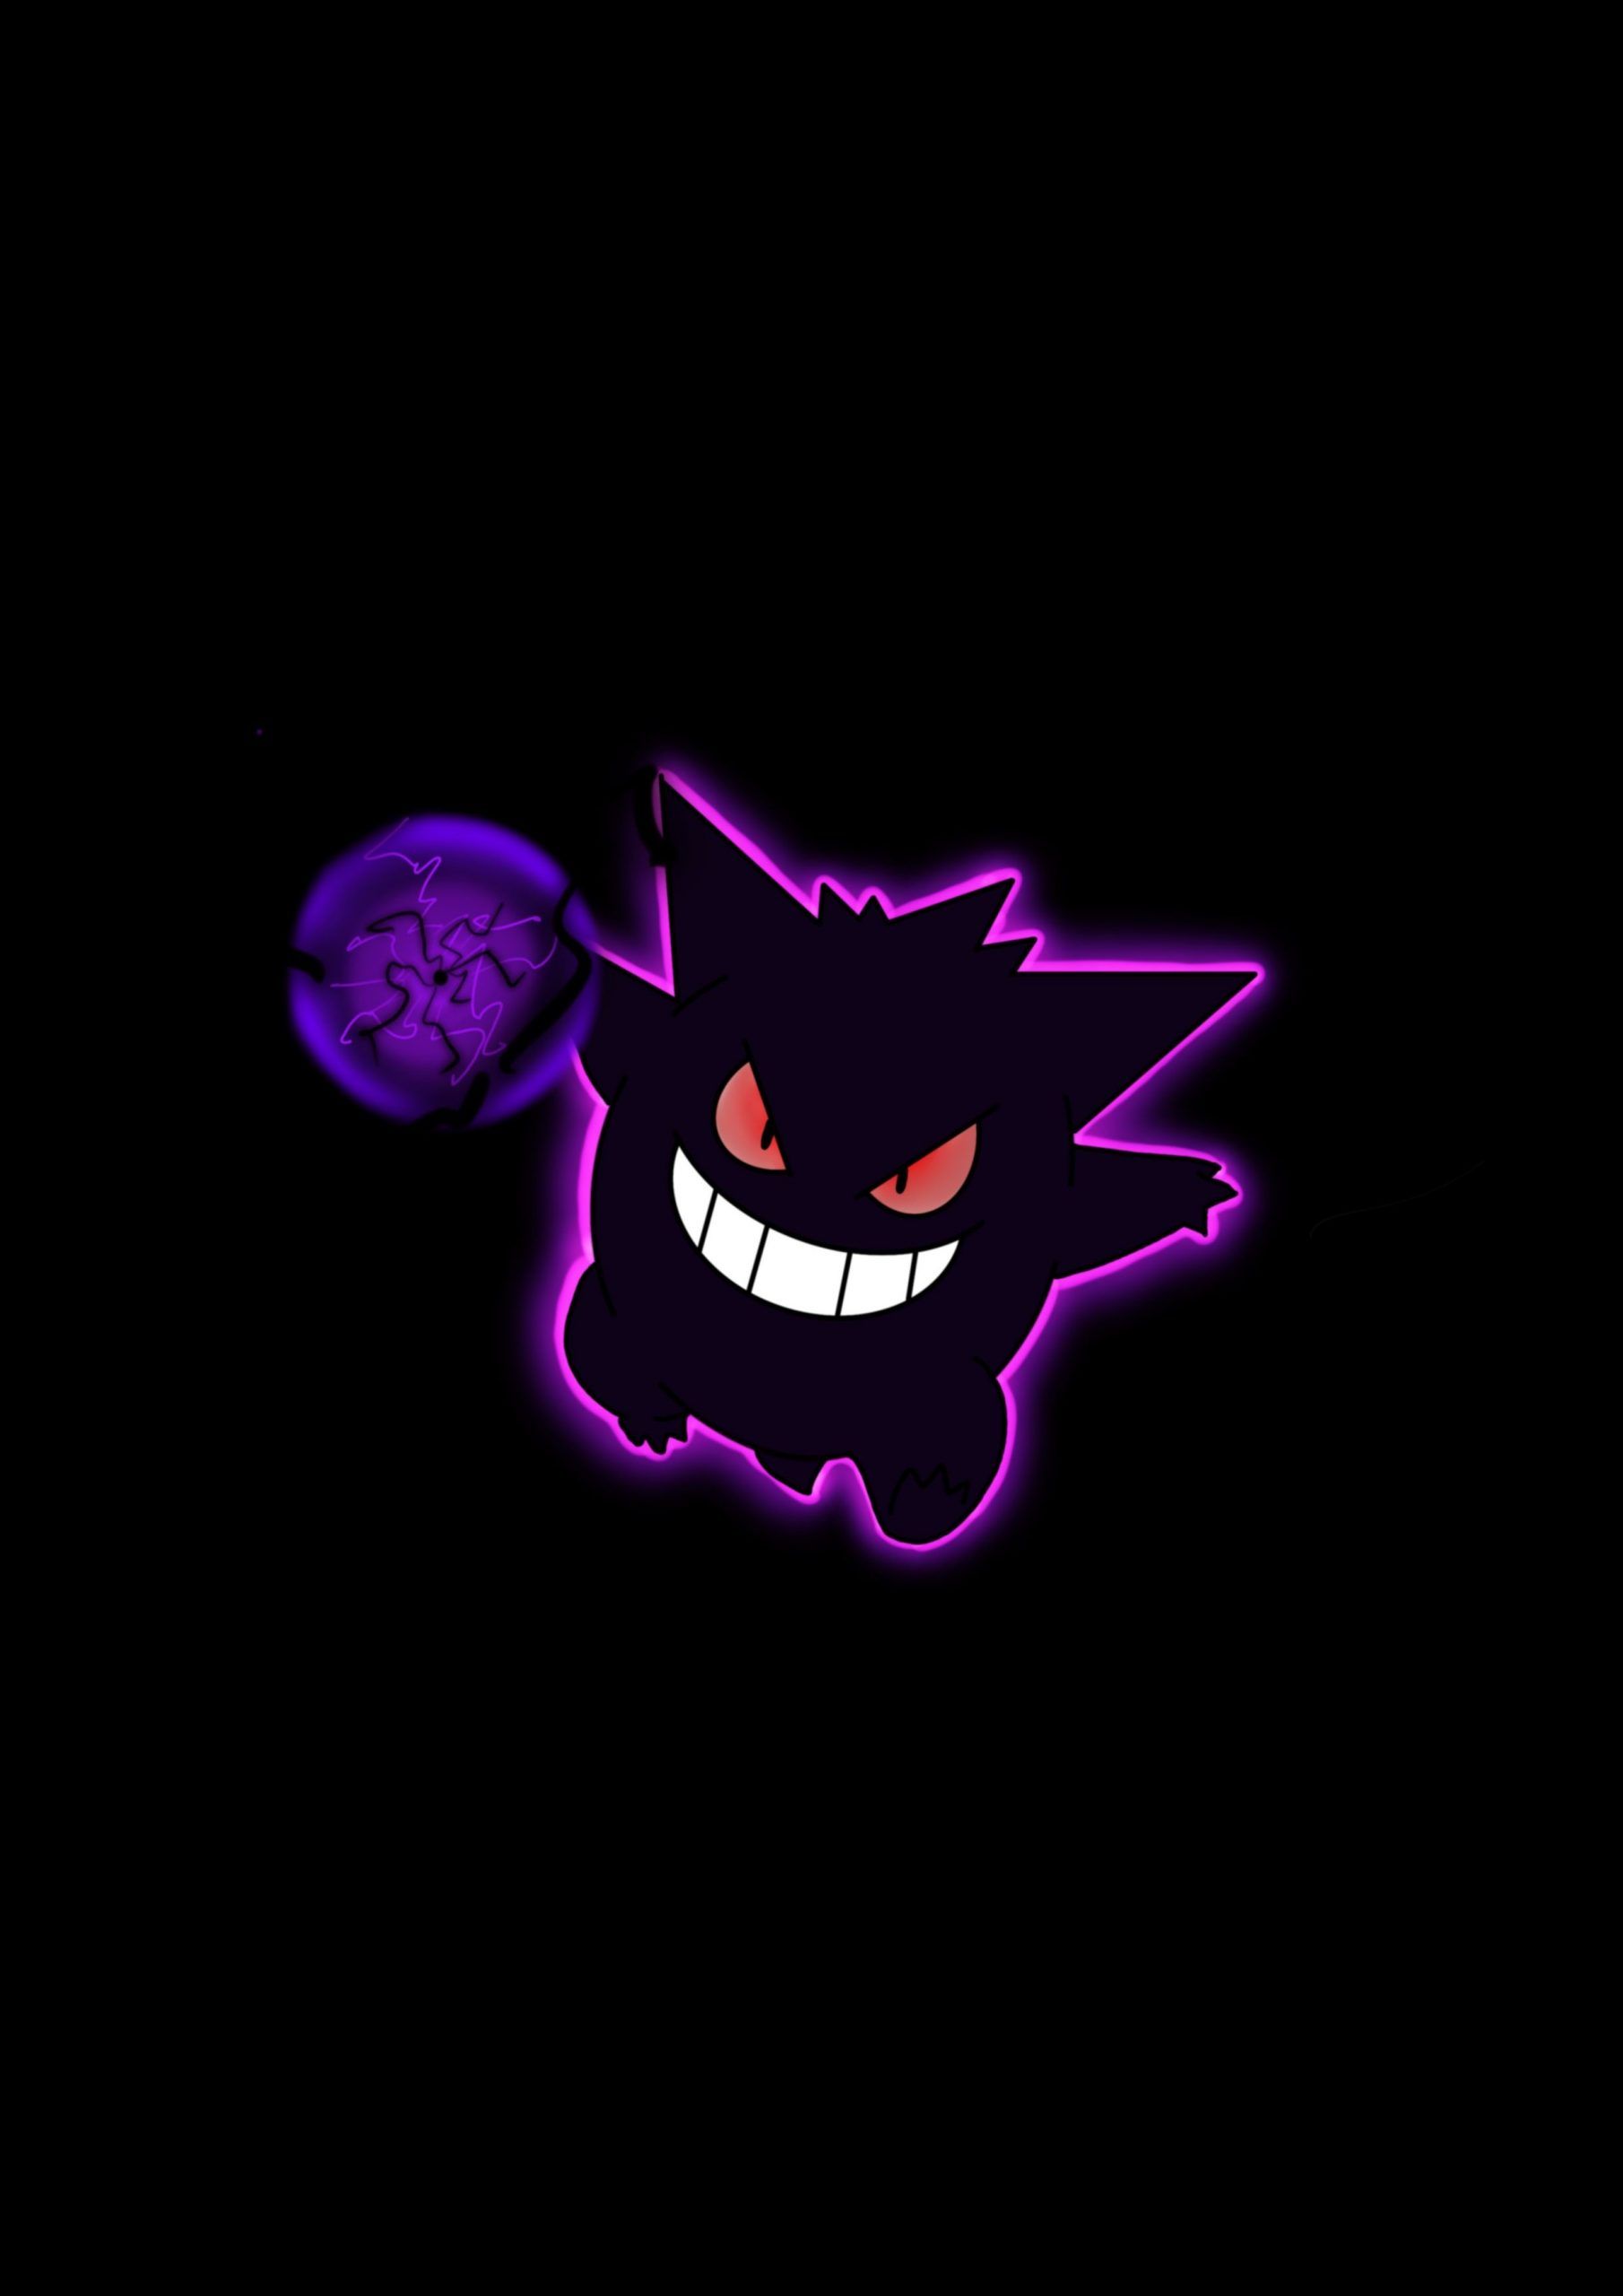 Background Gengar Wallpaper Discover more Anime, Character, Chibi, Cute, Gengar wallpaper. /. Hipster wallpaper, Goth wallpaper, Gengar